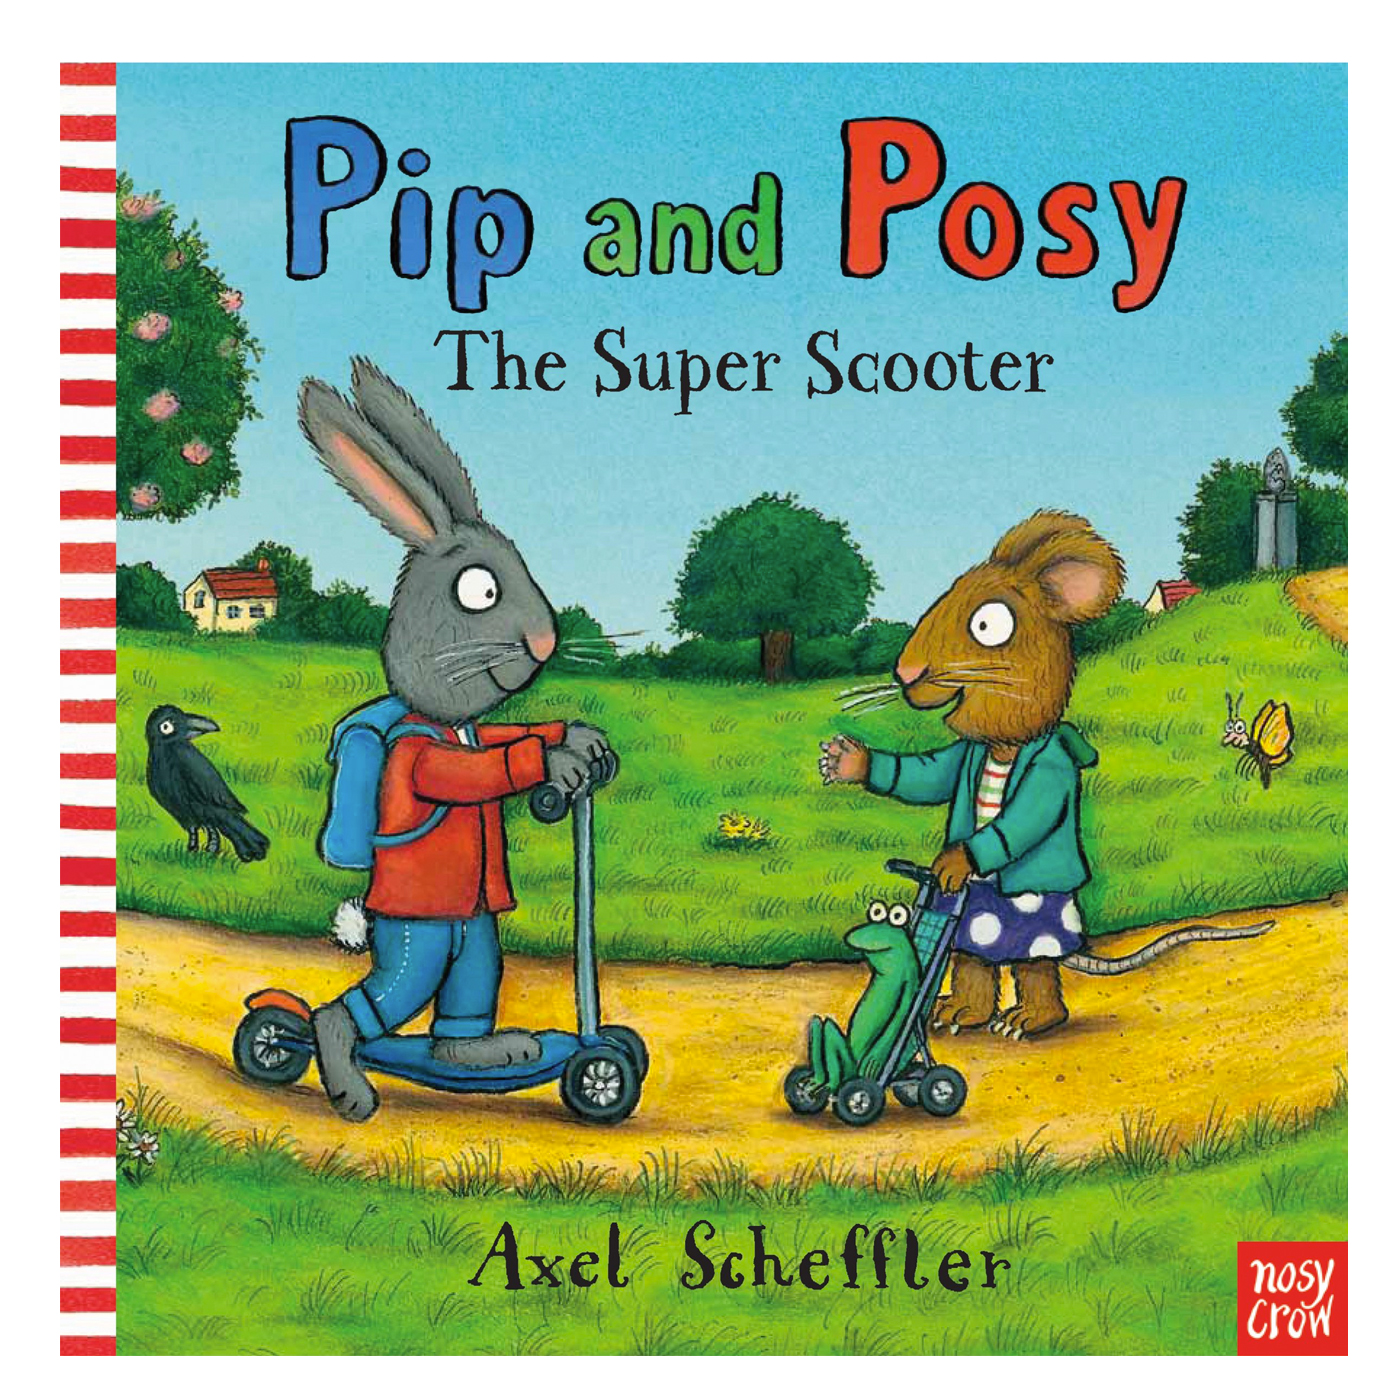  Pip and Posy: The Super Scooter